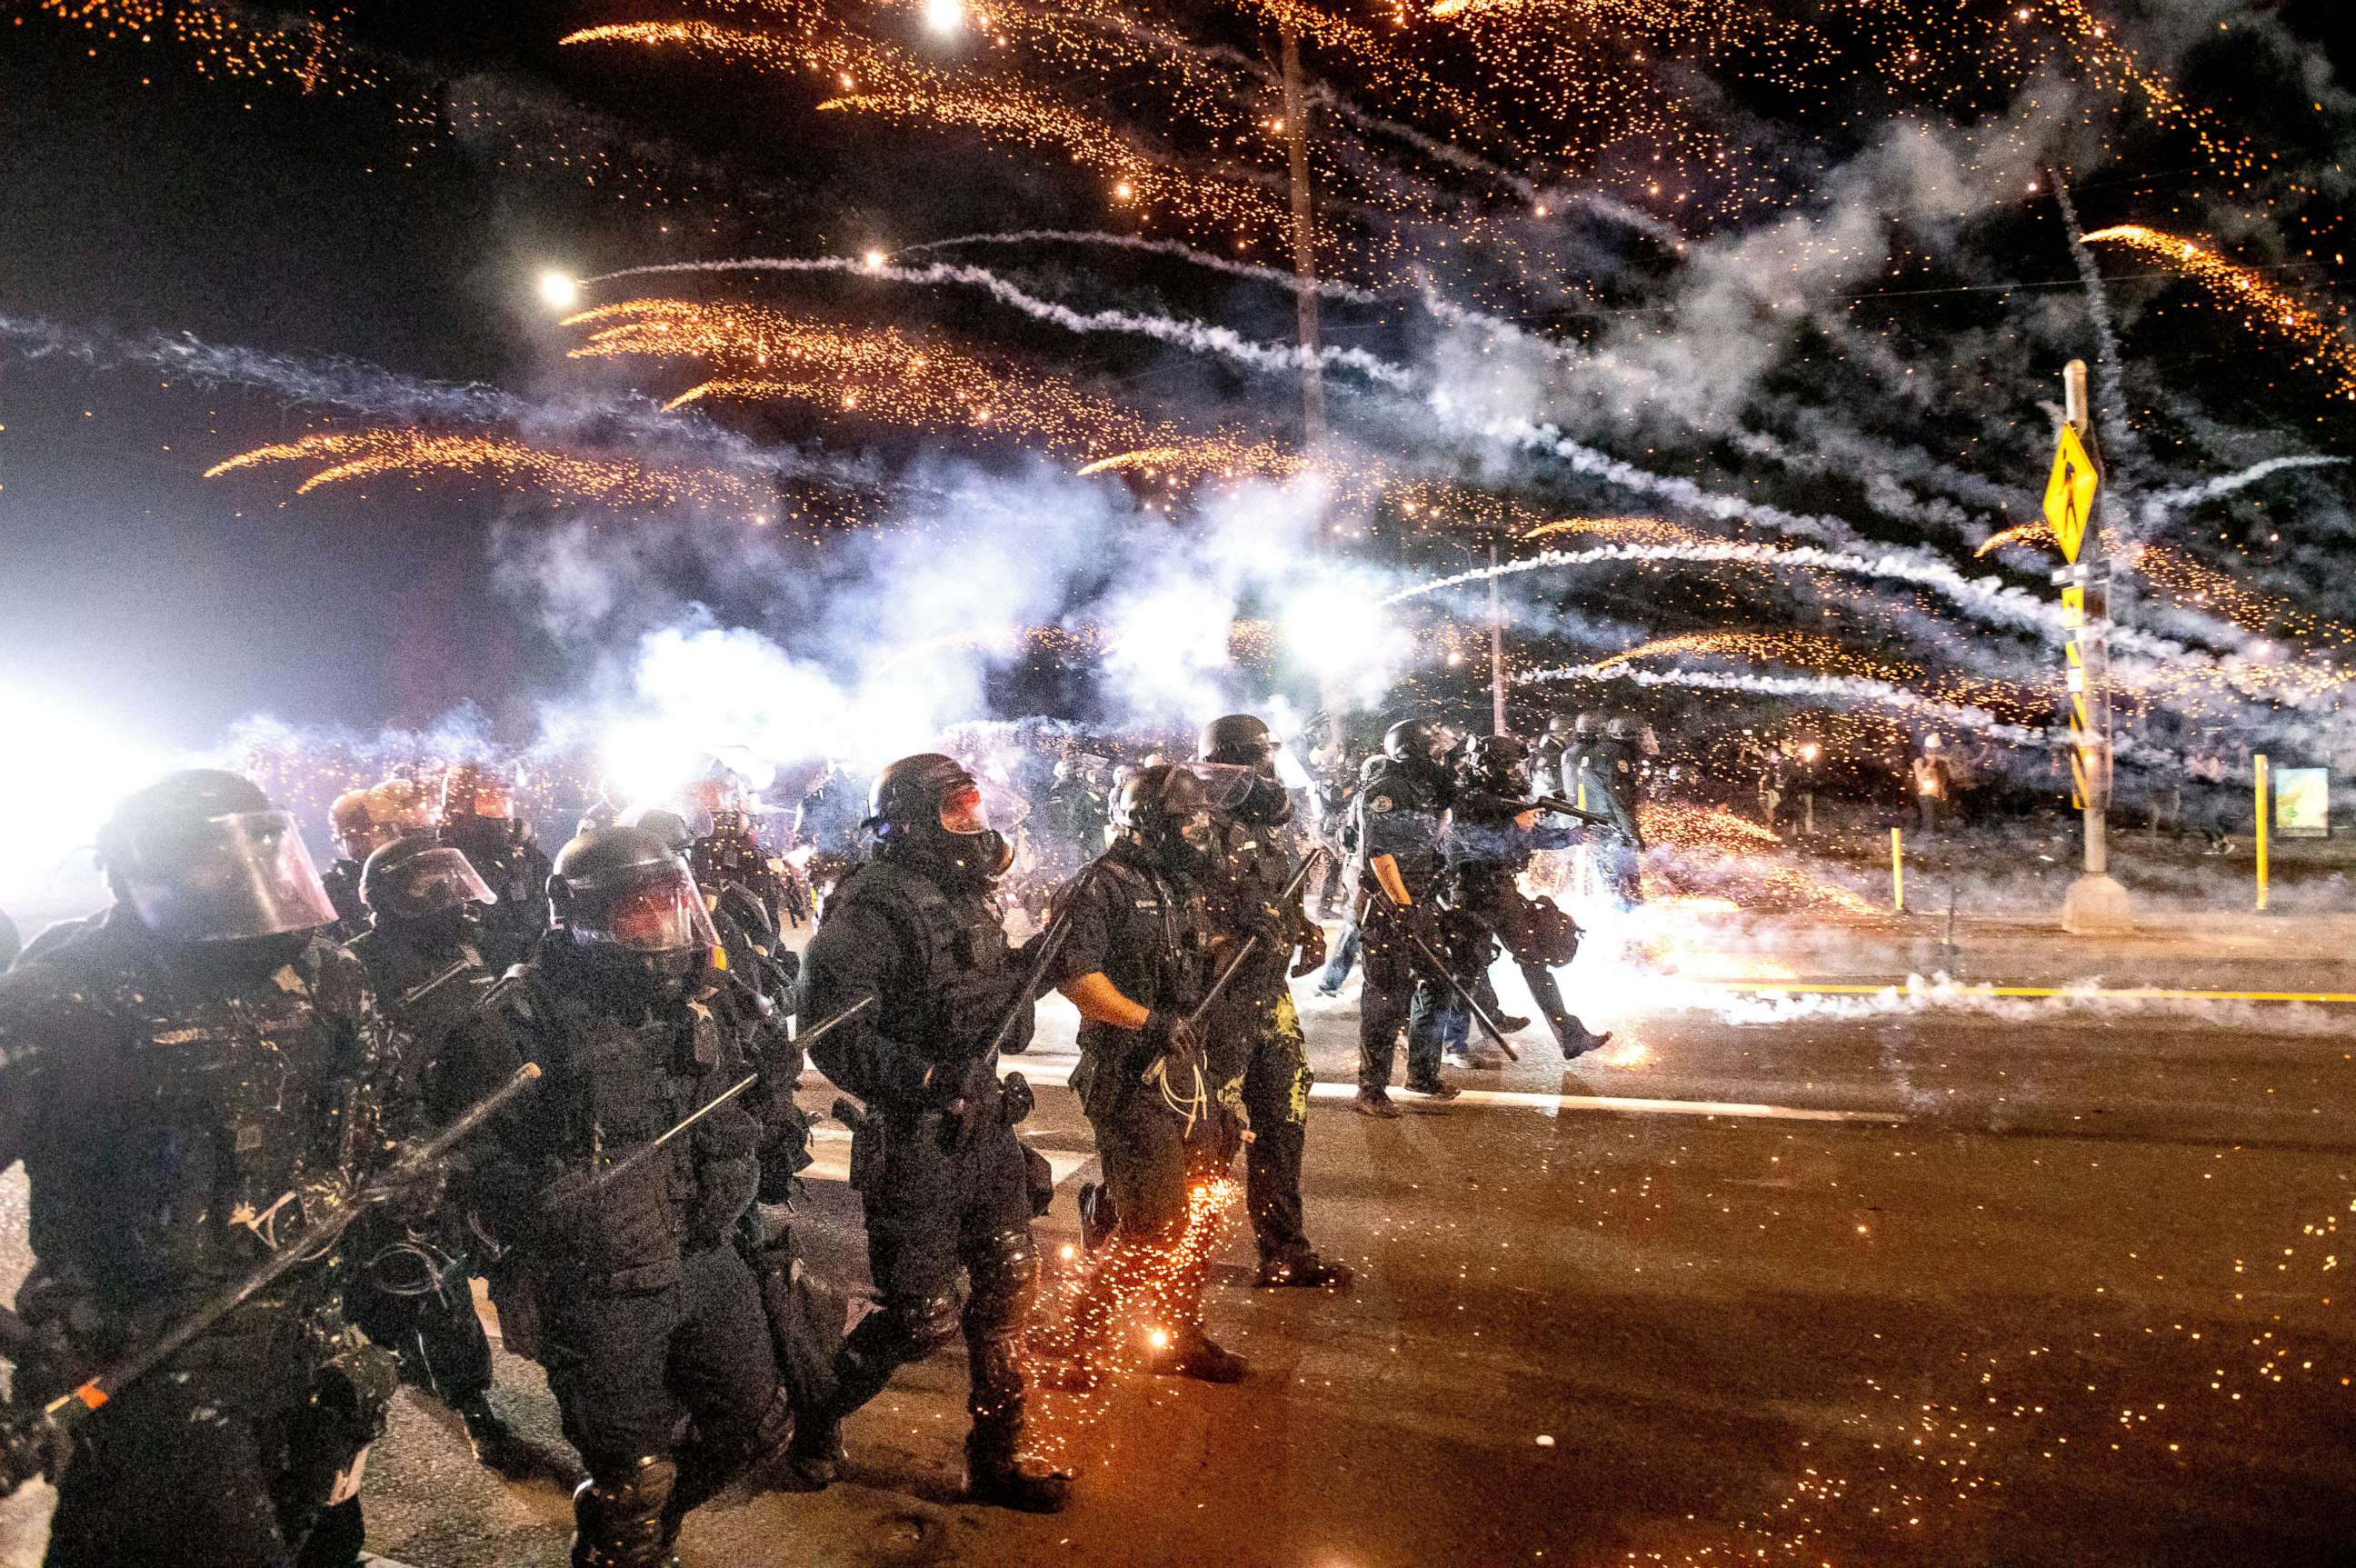 PHOTO: FILE - In this Sept. 5, 2020, file photo, police use chemical irritants and crowd control munitions to disperse protesters during a demonstration in Portland, Ore. 